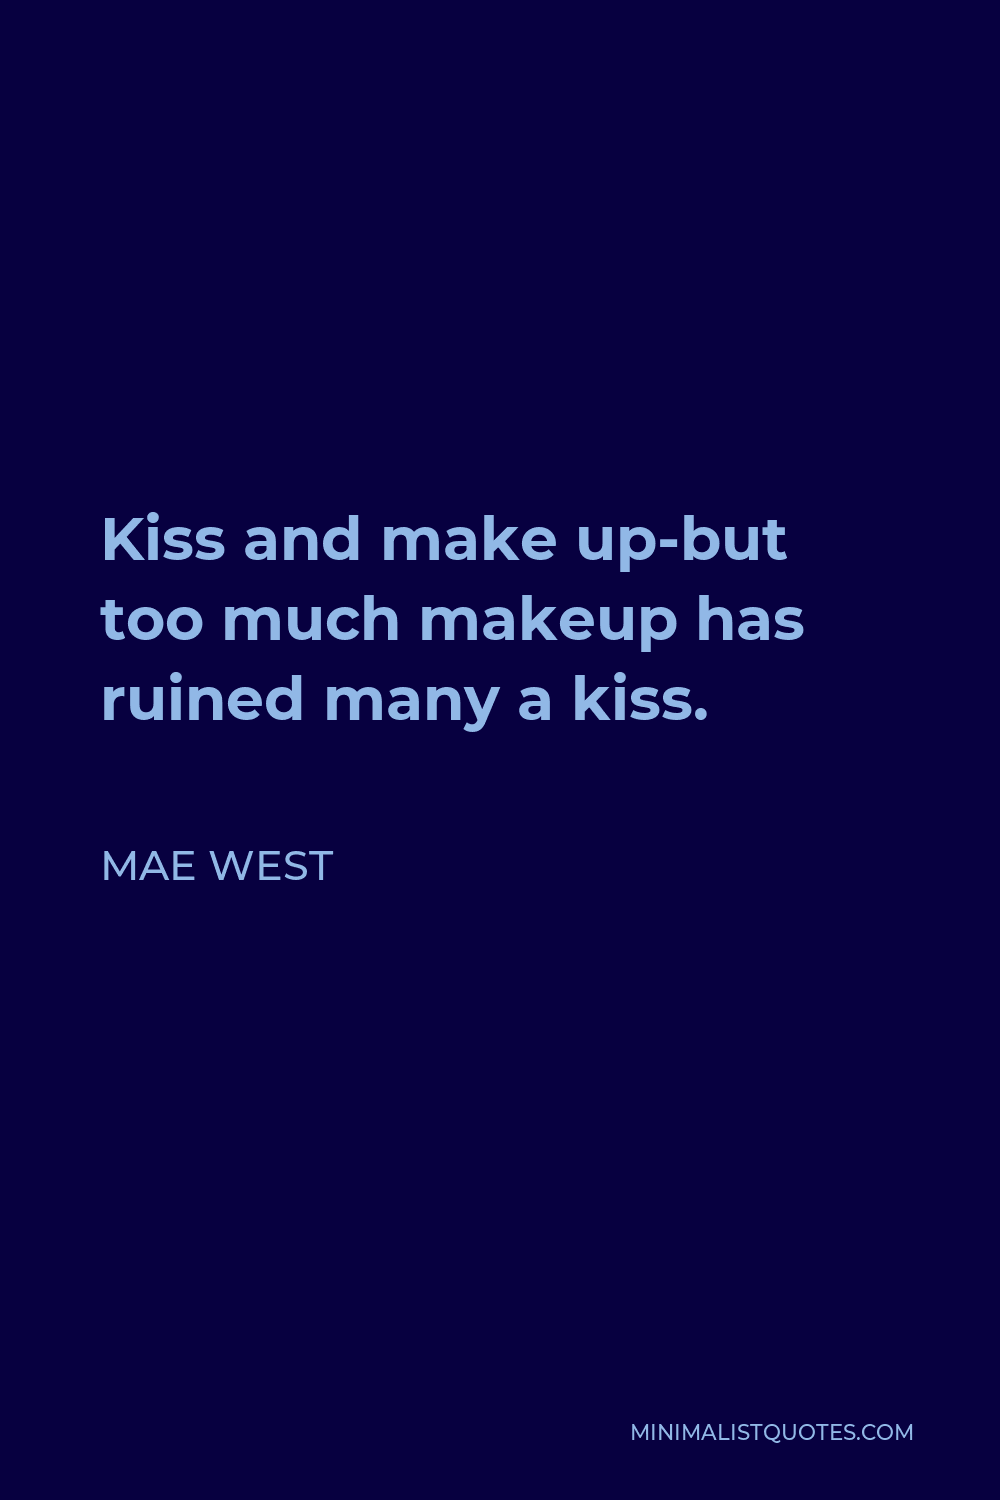 Mae West Quote - Kiss and make up-but too much makeup has ruined many a kiss.